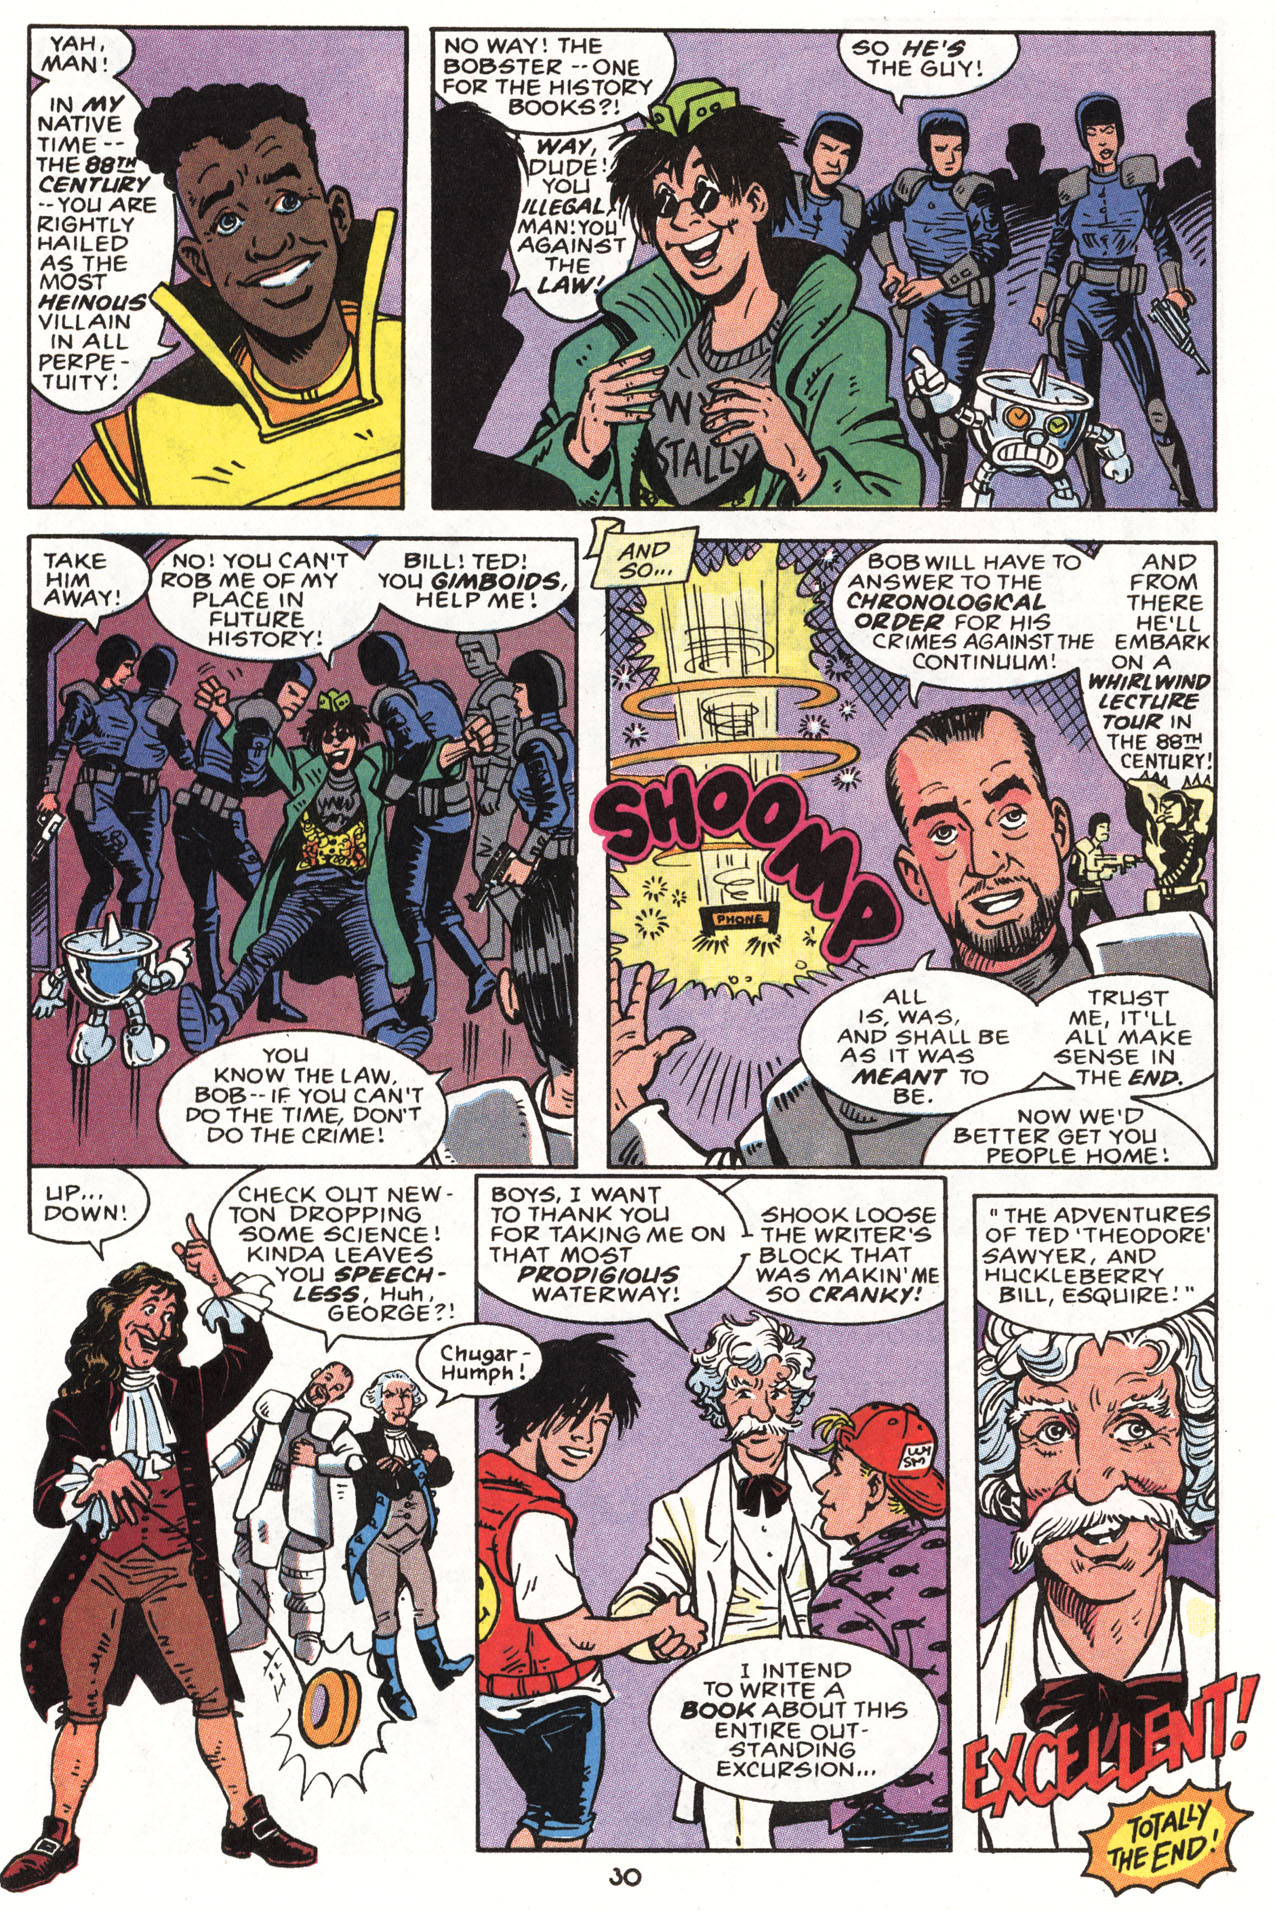 Read online Bill & Ted's Excellent Comic Book comic -  Issue #8 - 32